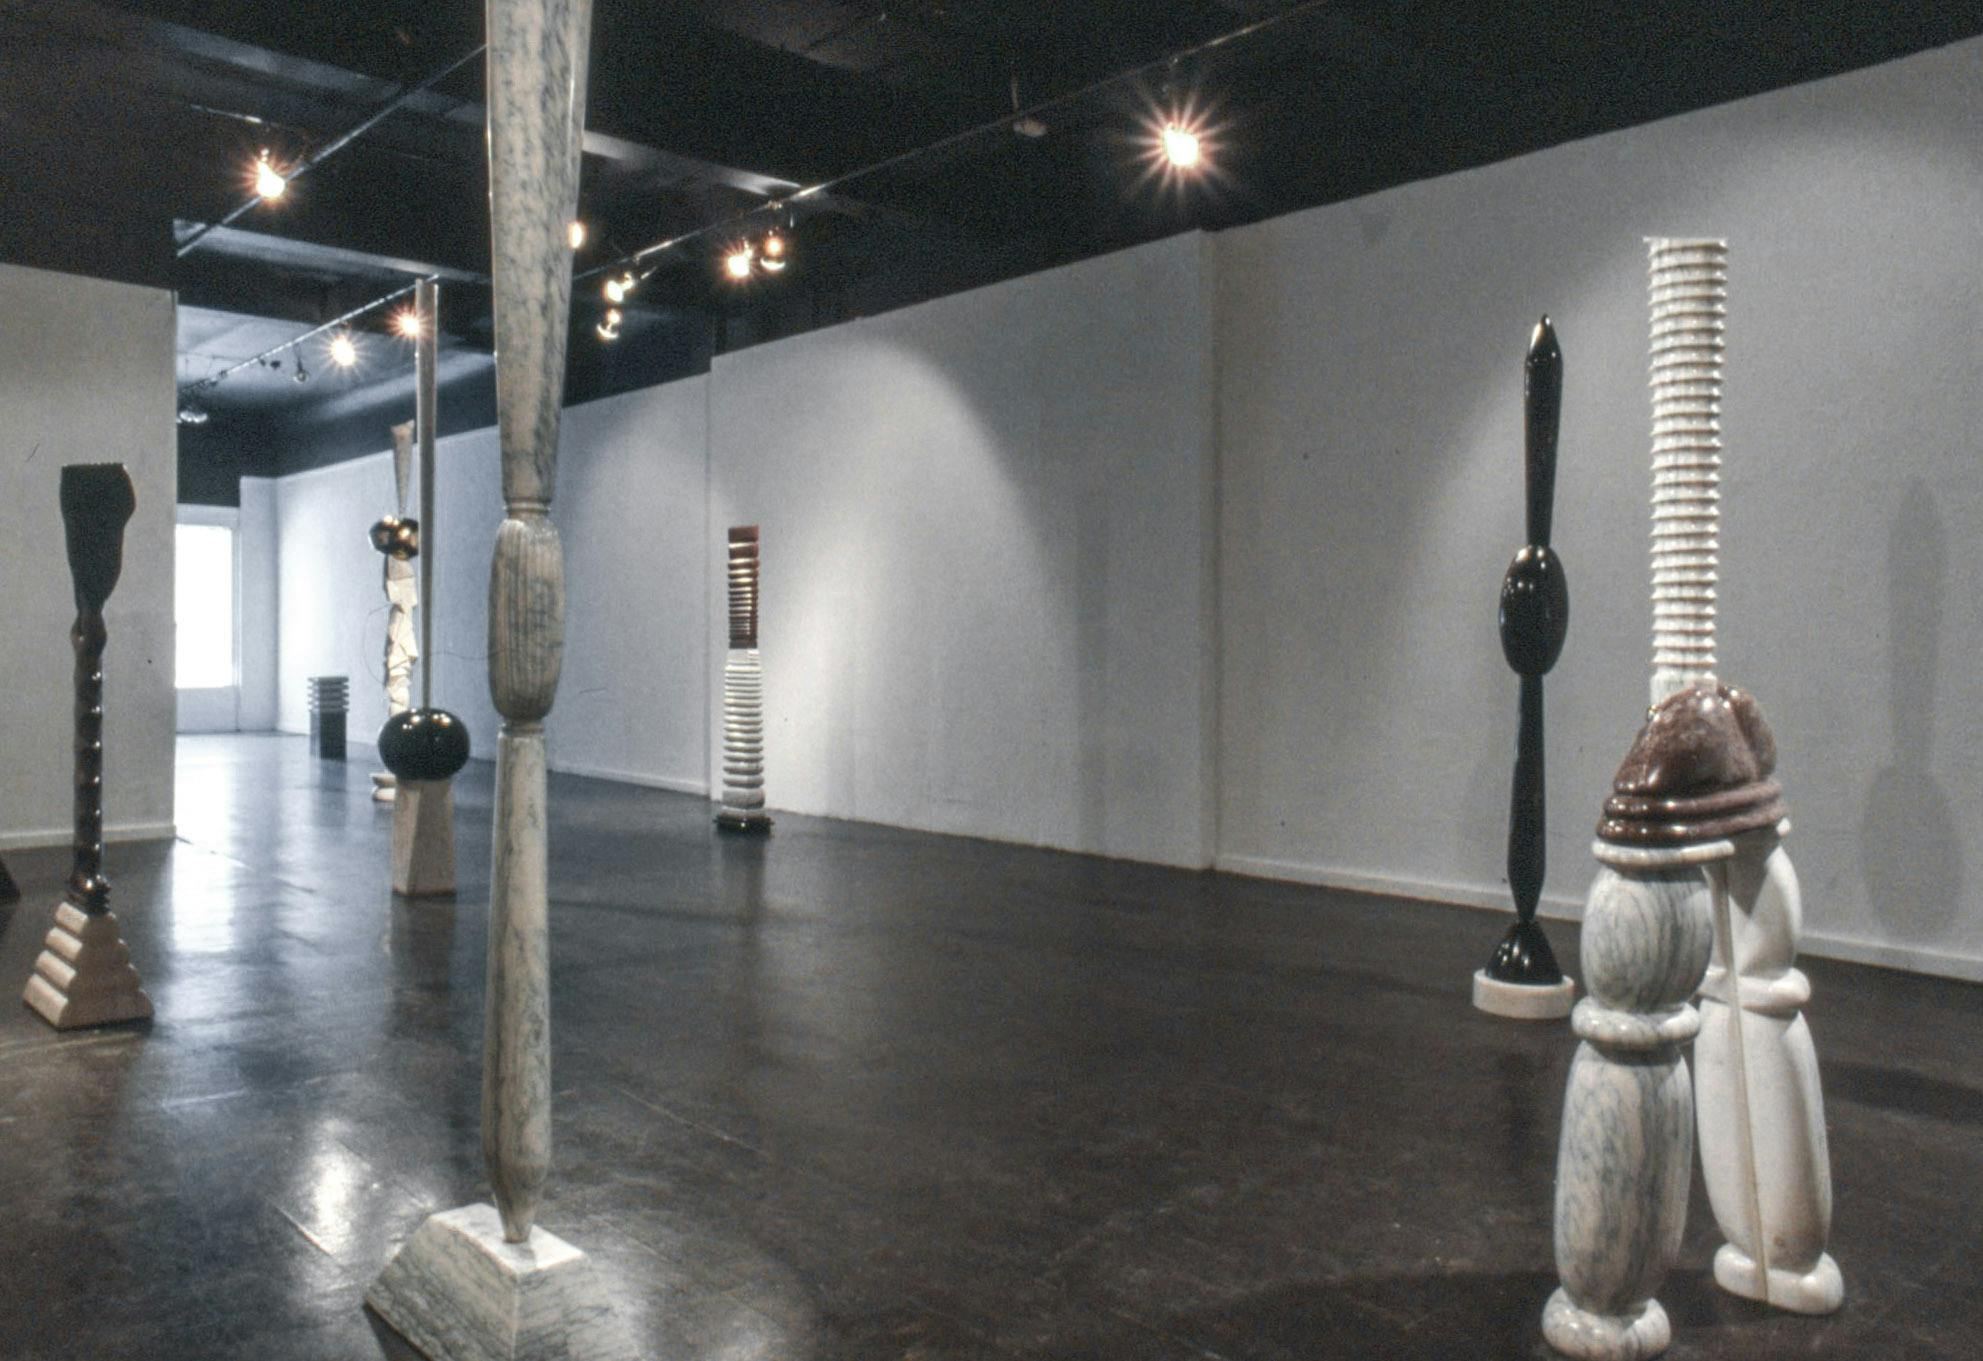 Several sculptures in a gallery space. The sculptures are made of different black, white, and brown stones. They are carved and stacked into different tall, ridged and bulbous forms.